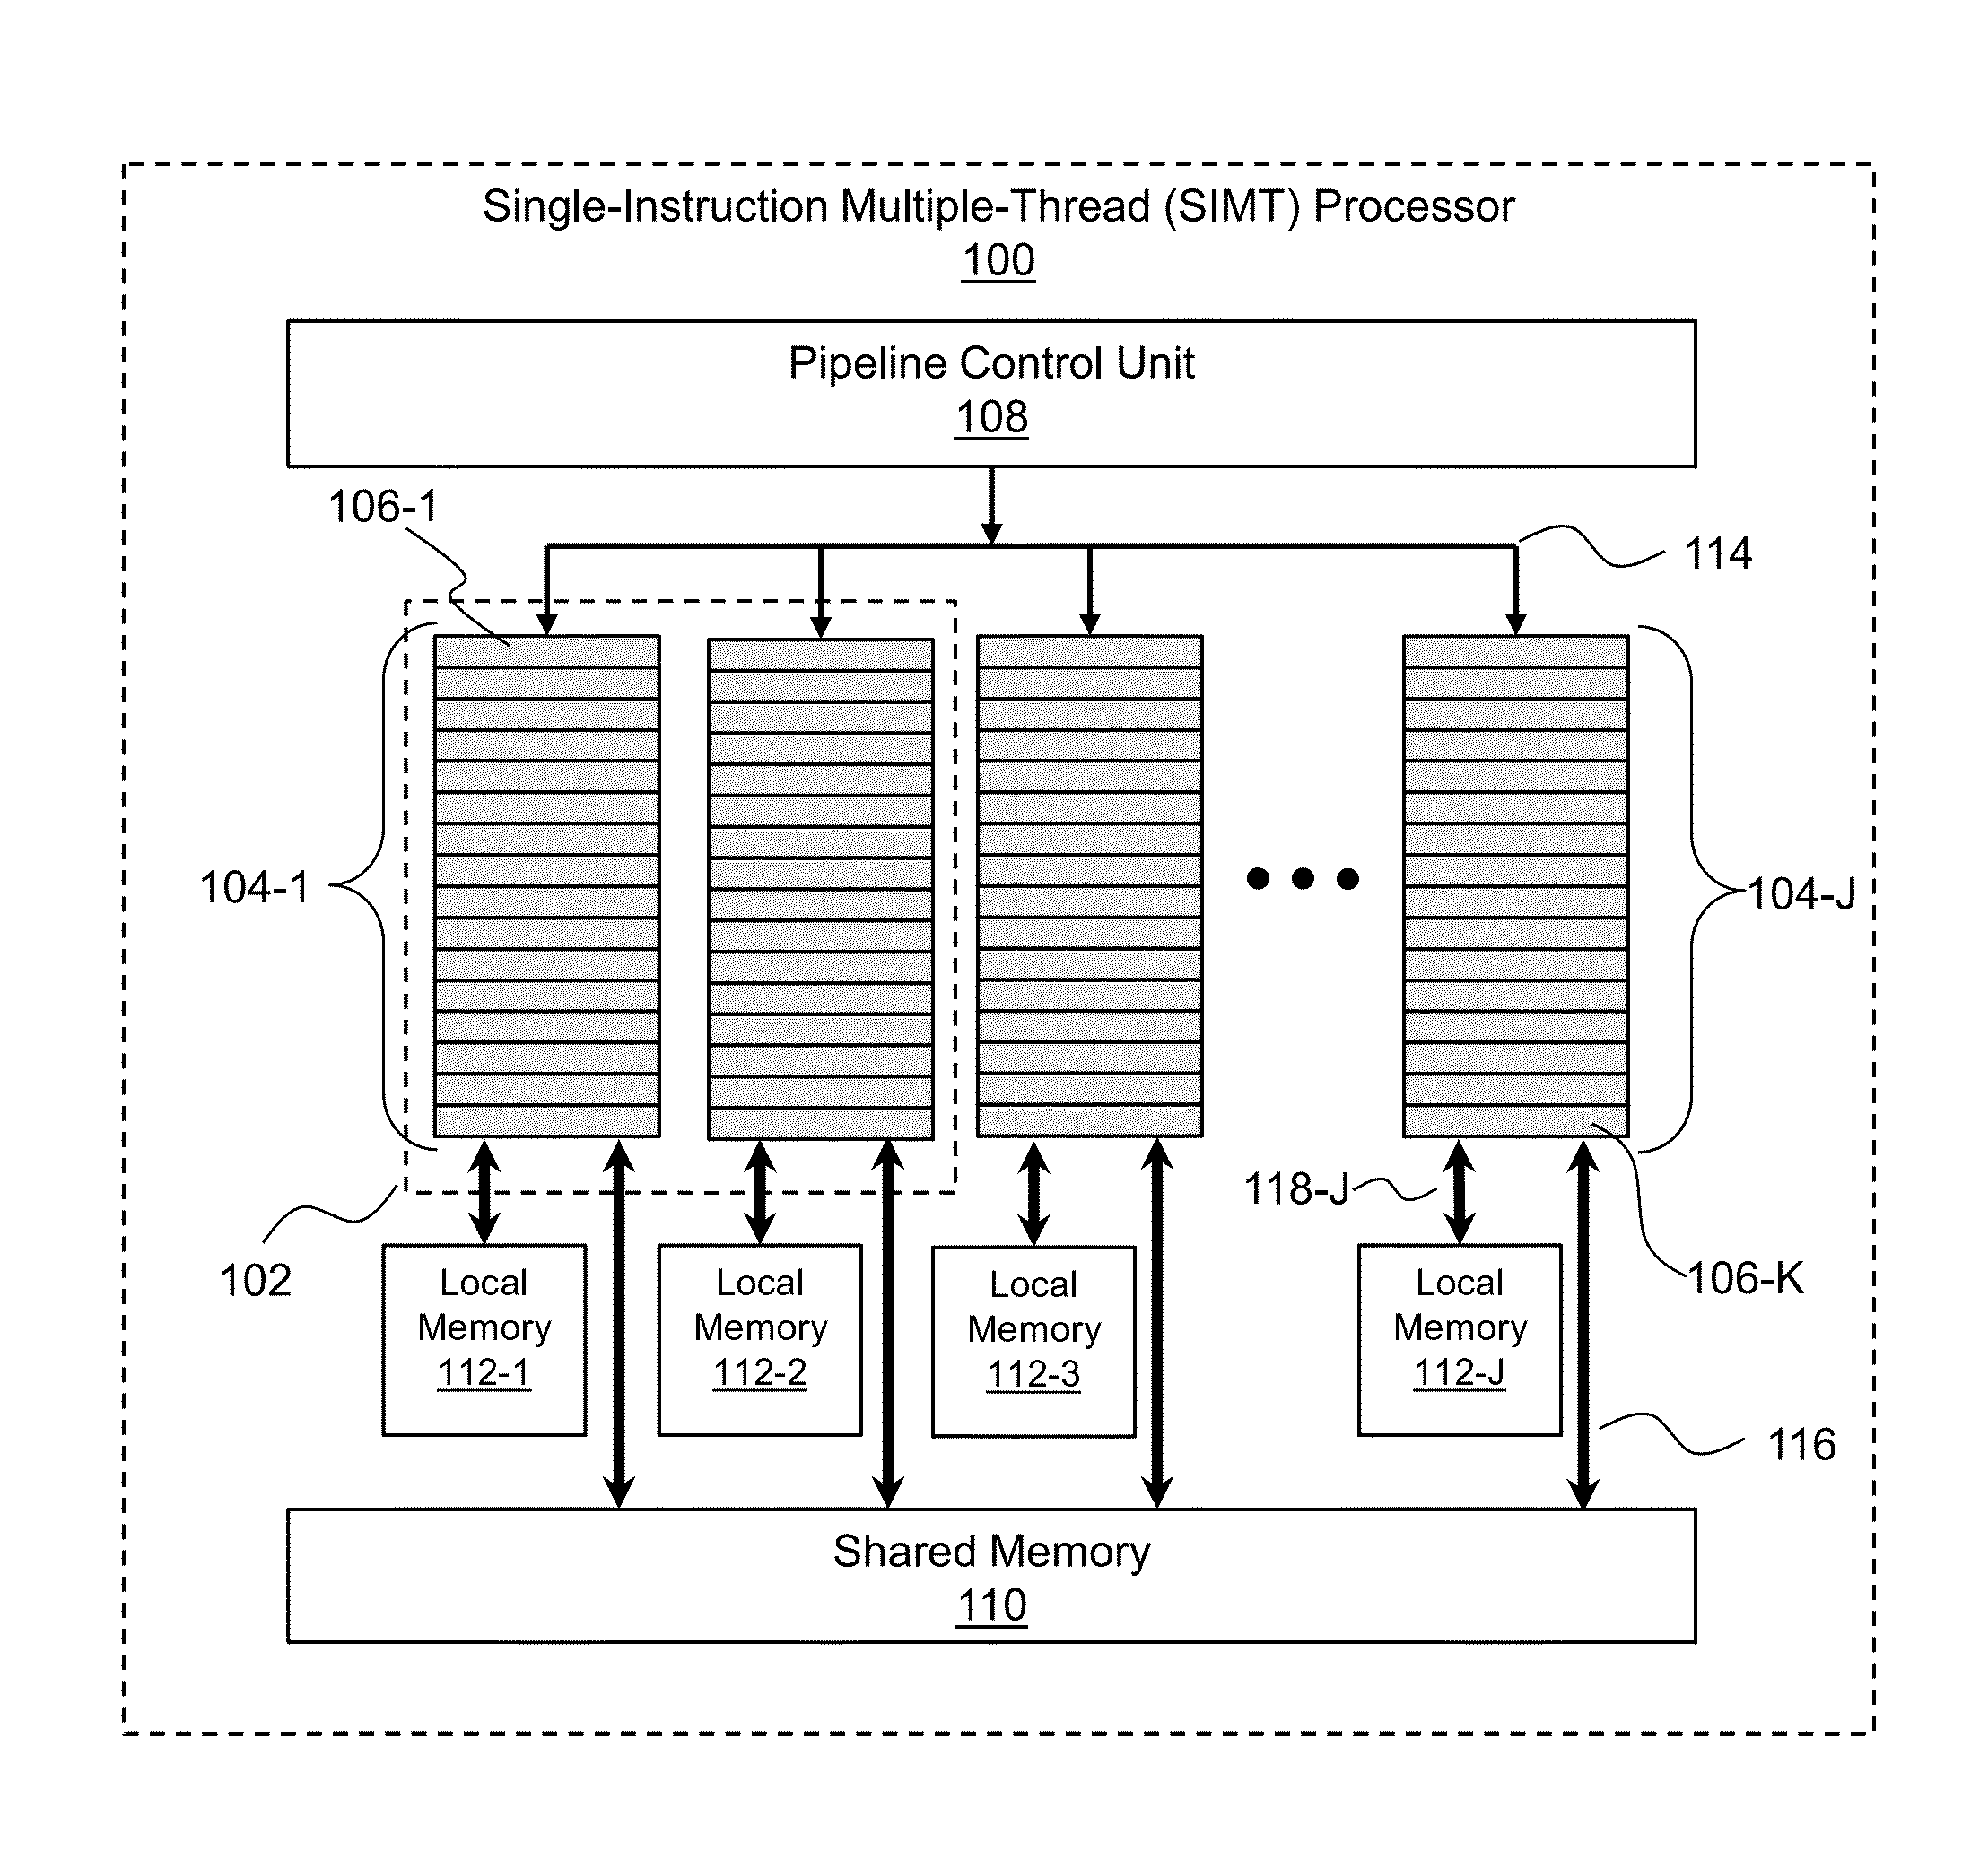 System and method for computing gathers using a single-instruction multiple-thread processor